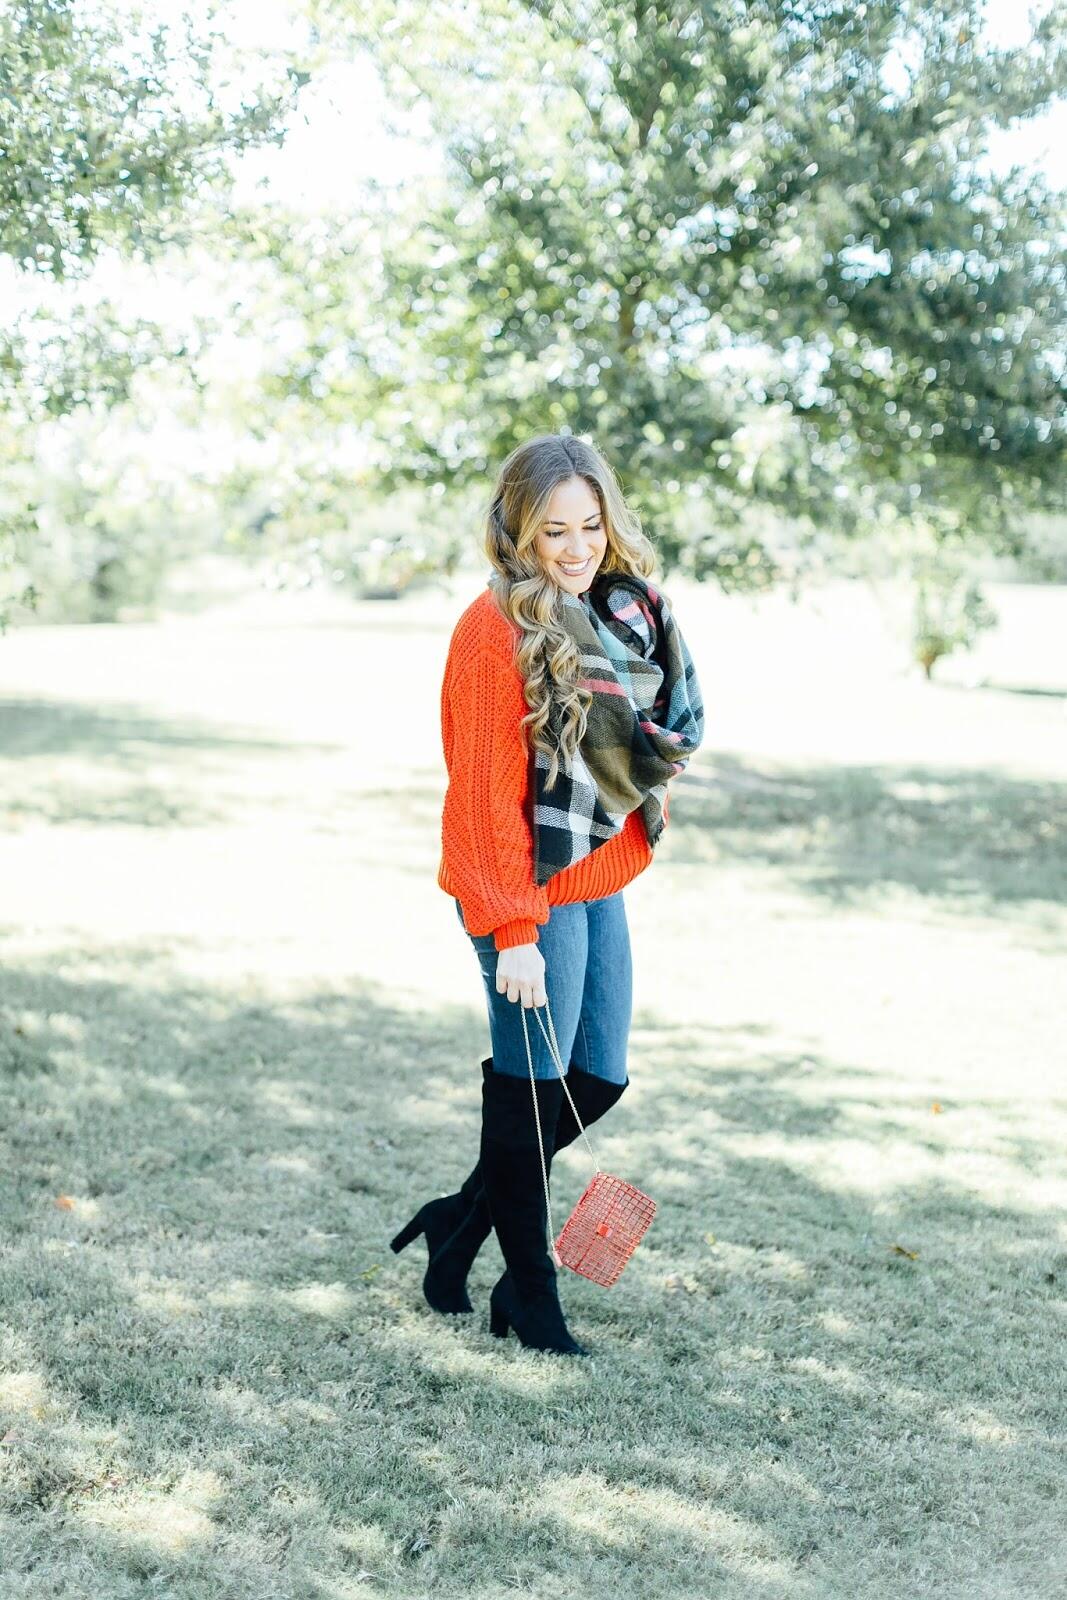 Trend Spin Linkup - Sweater Weather by East Memphis fashion blogger Walking in Memphis in High Heels